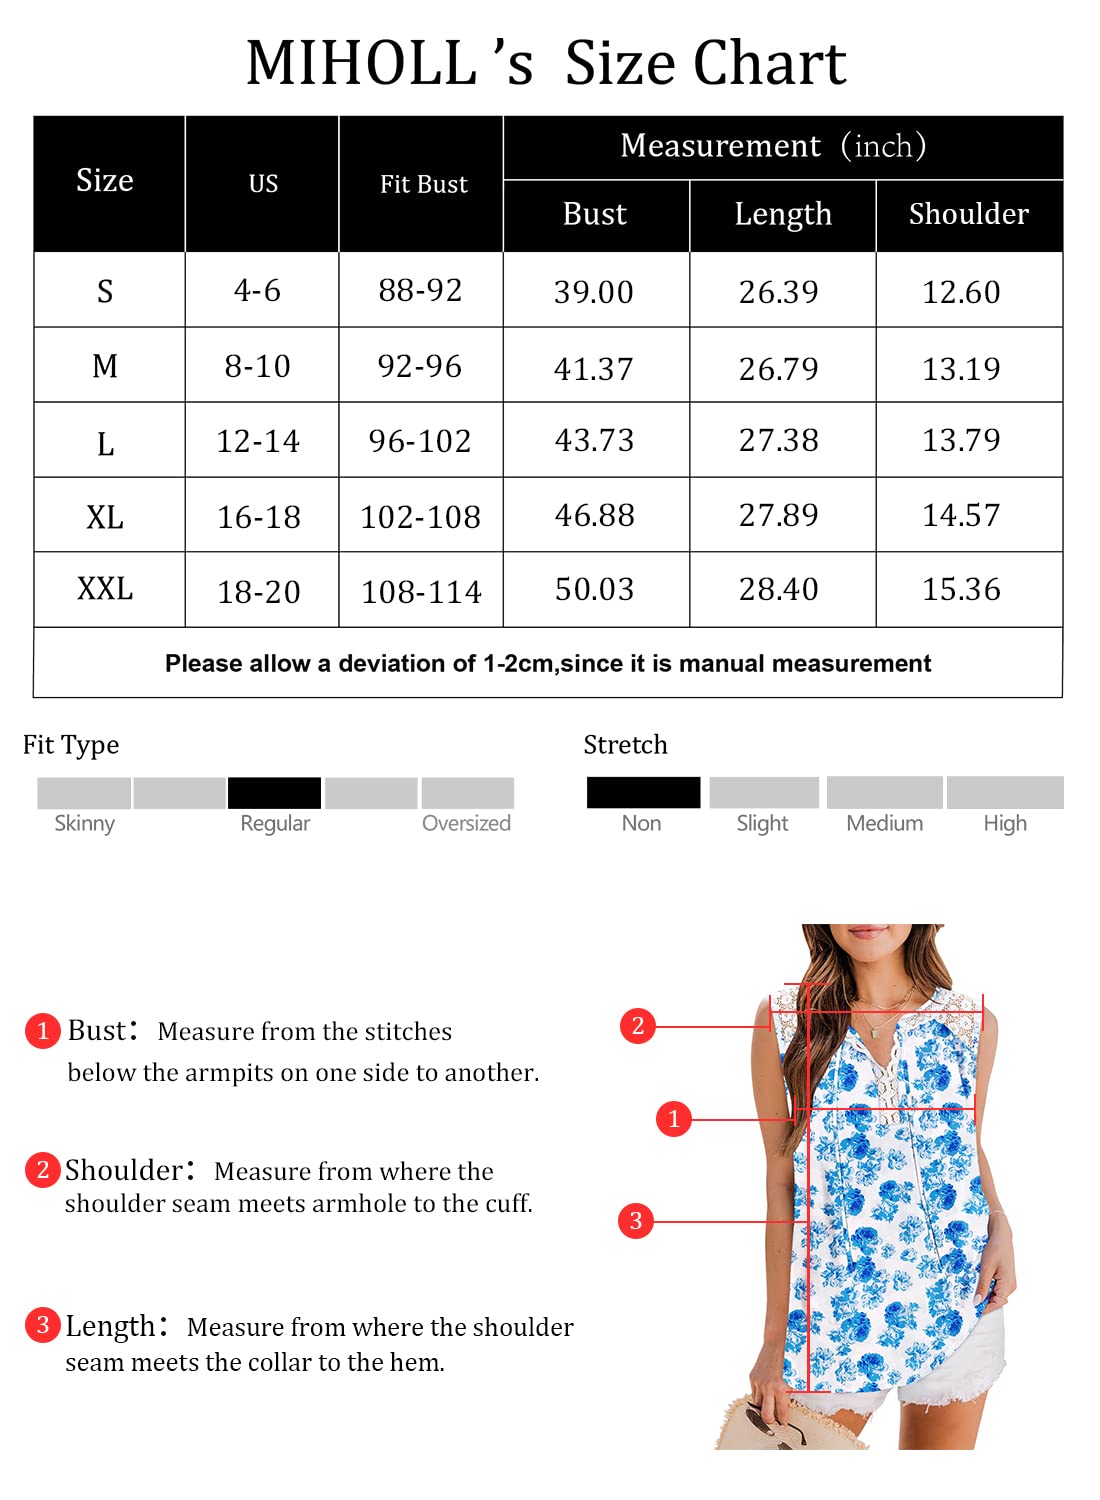 MIHOLL Women's Casual Sleeveless Tops Boho Floral Printed Lace V Neck Tank Top Loose Shirt Blouse